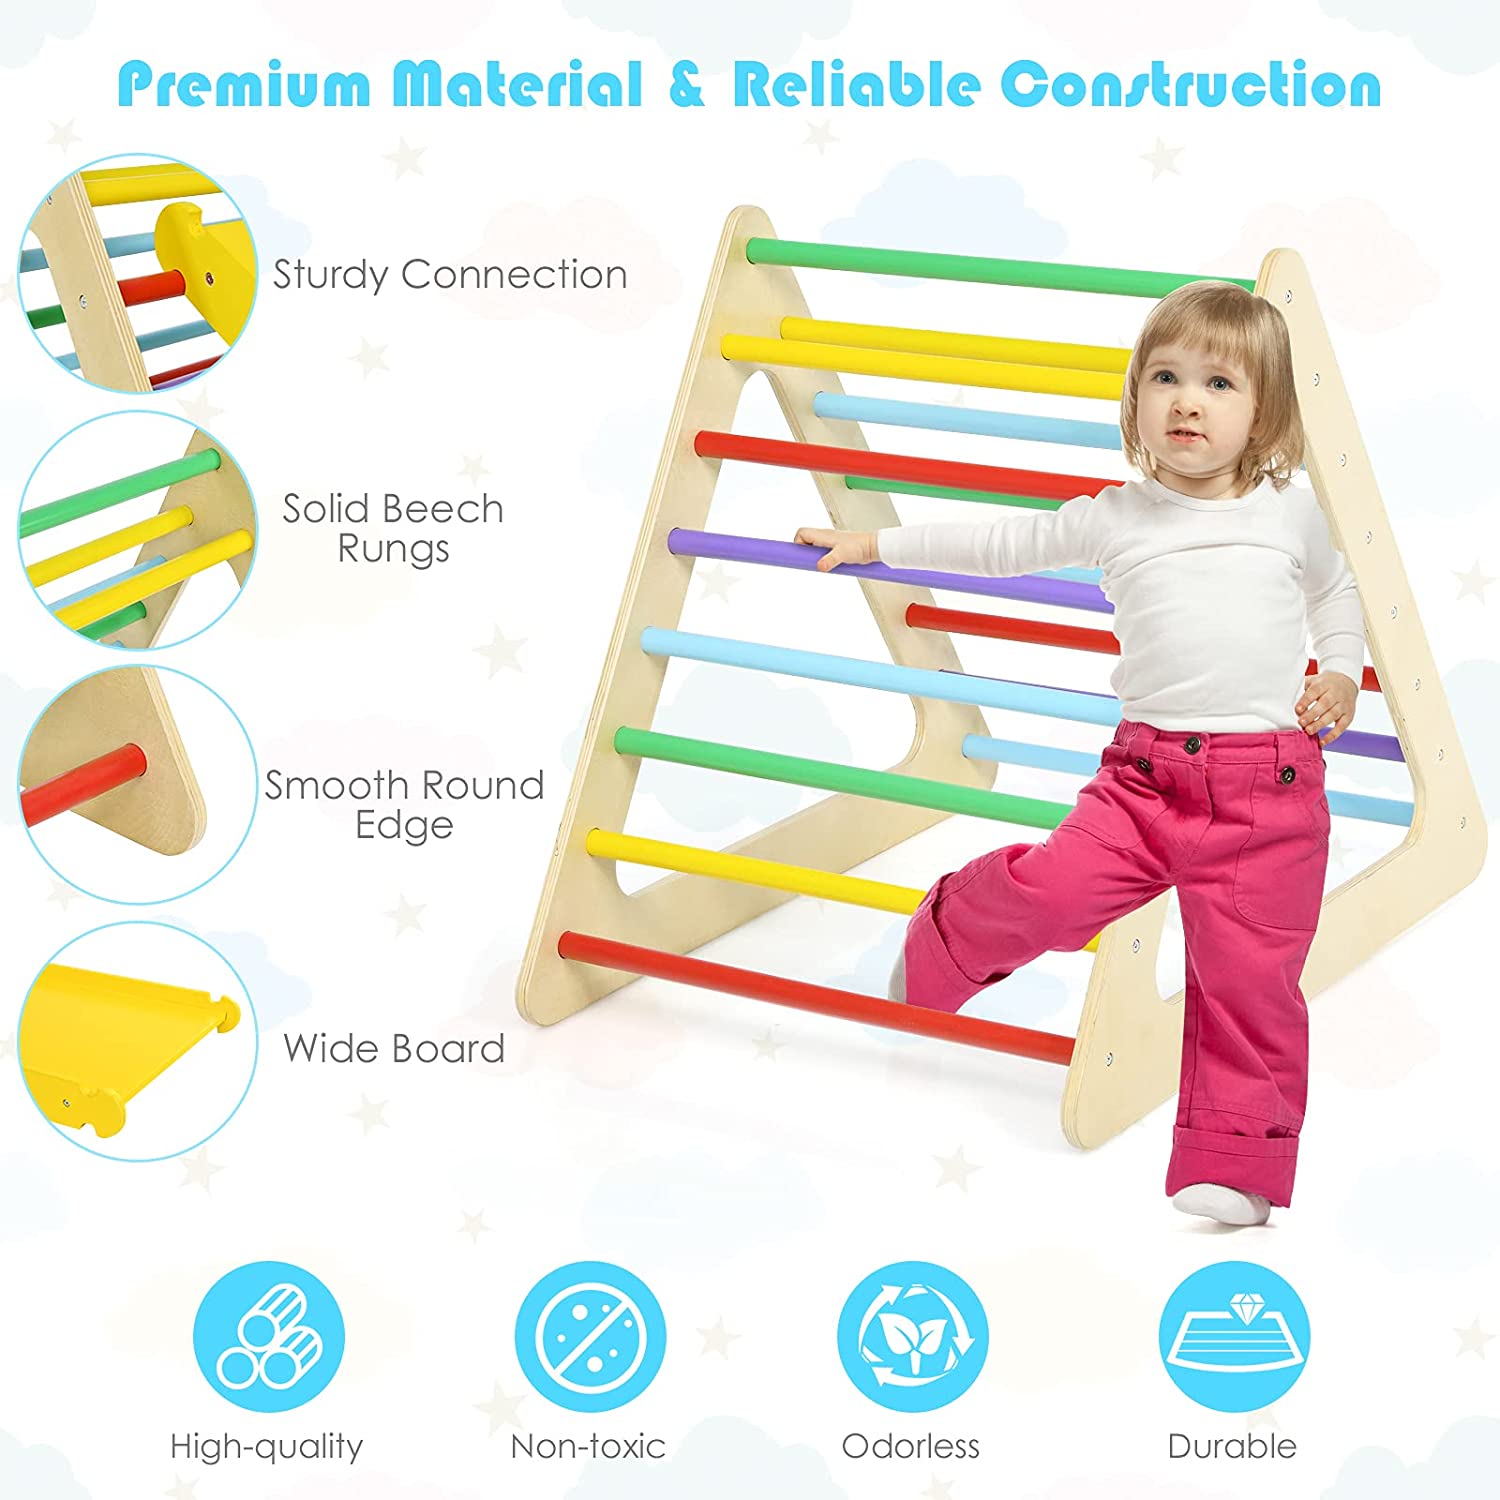 Chairliving 5-in-1 Kids Triangle Climber Wooden Climbing Toys Toddler Montessori Play Gym Set Playground Climbing Ladder with 2 Ramp